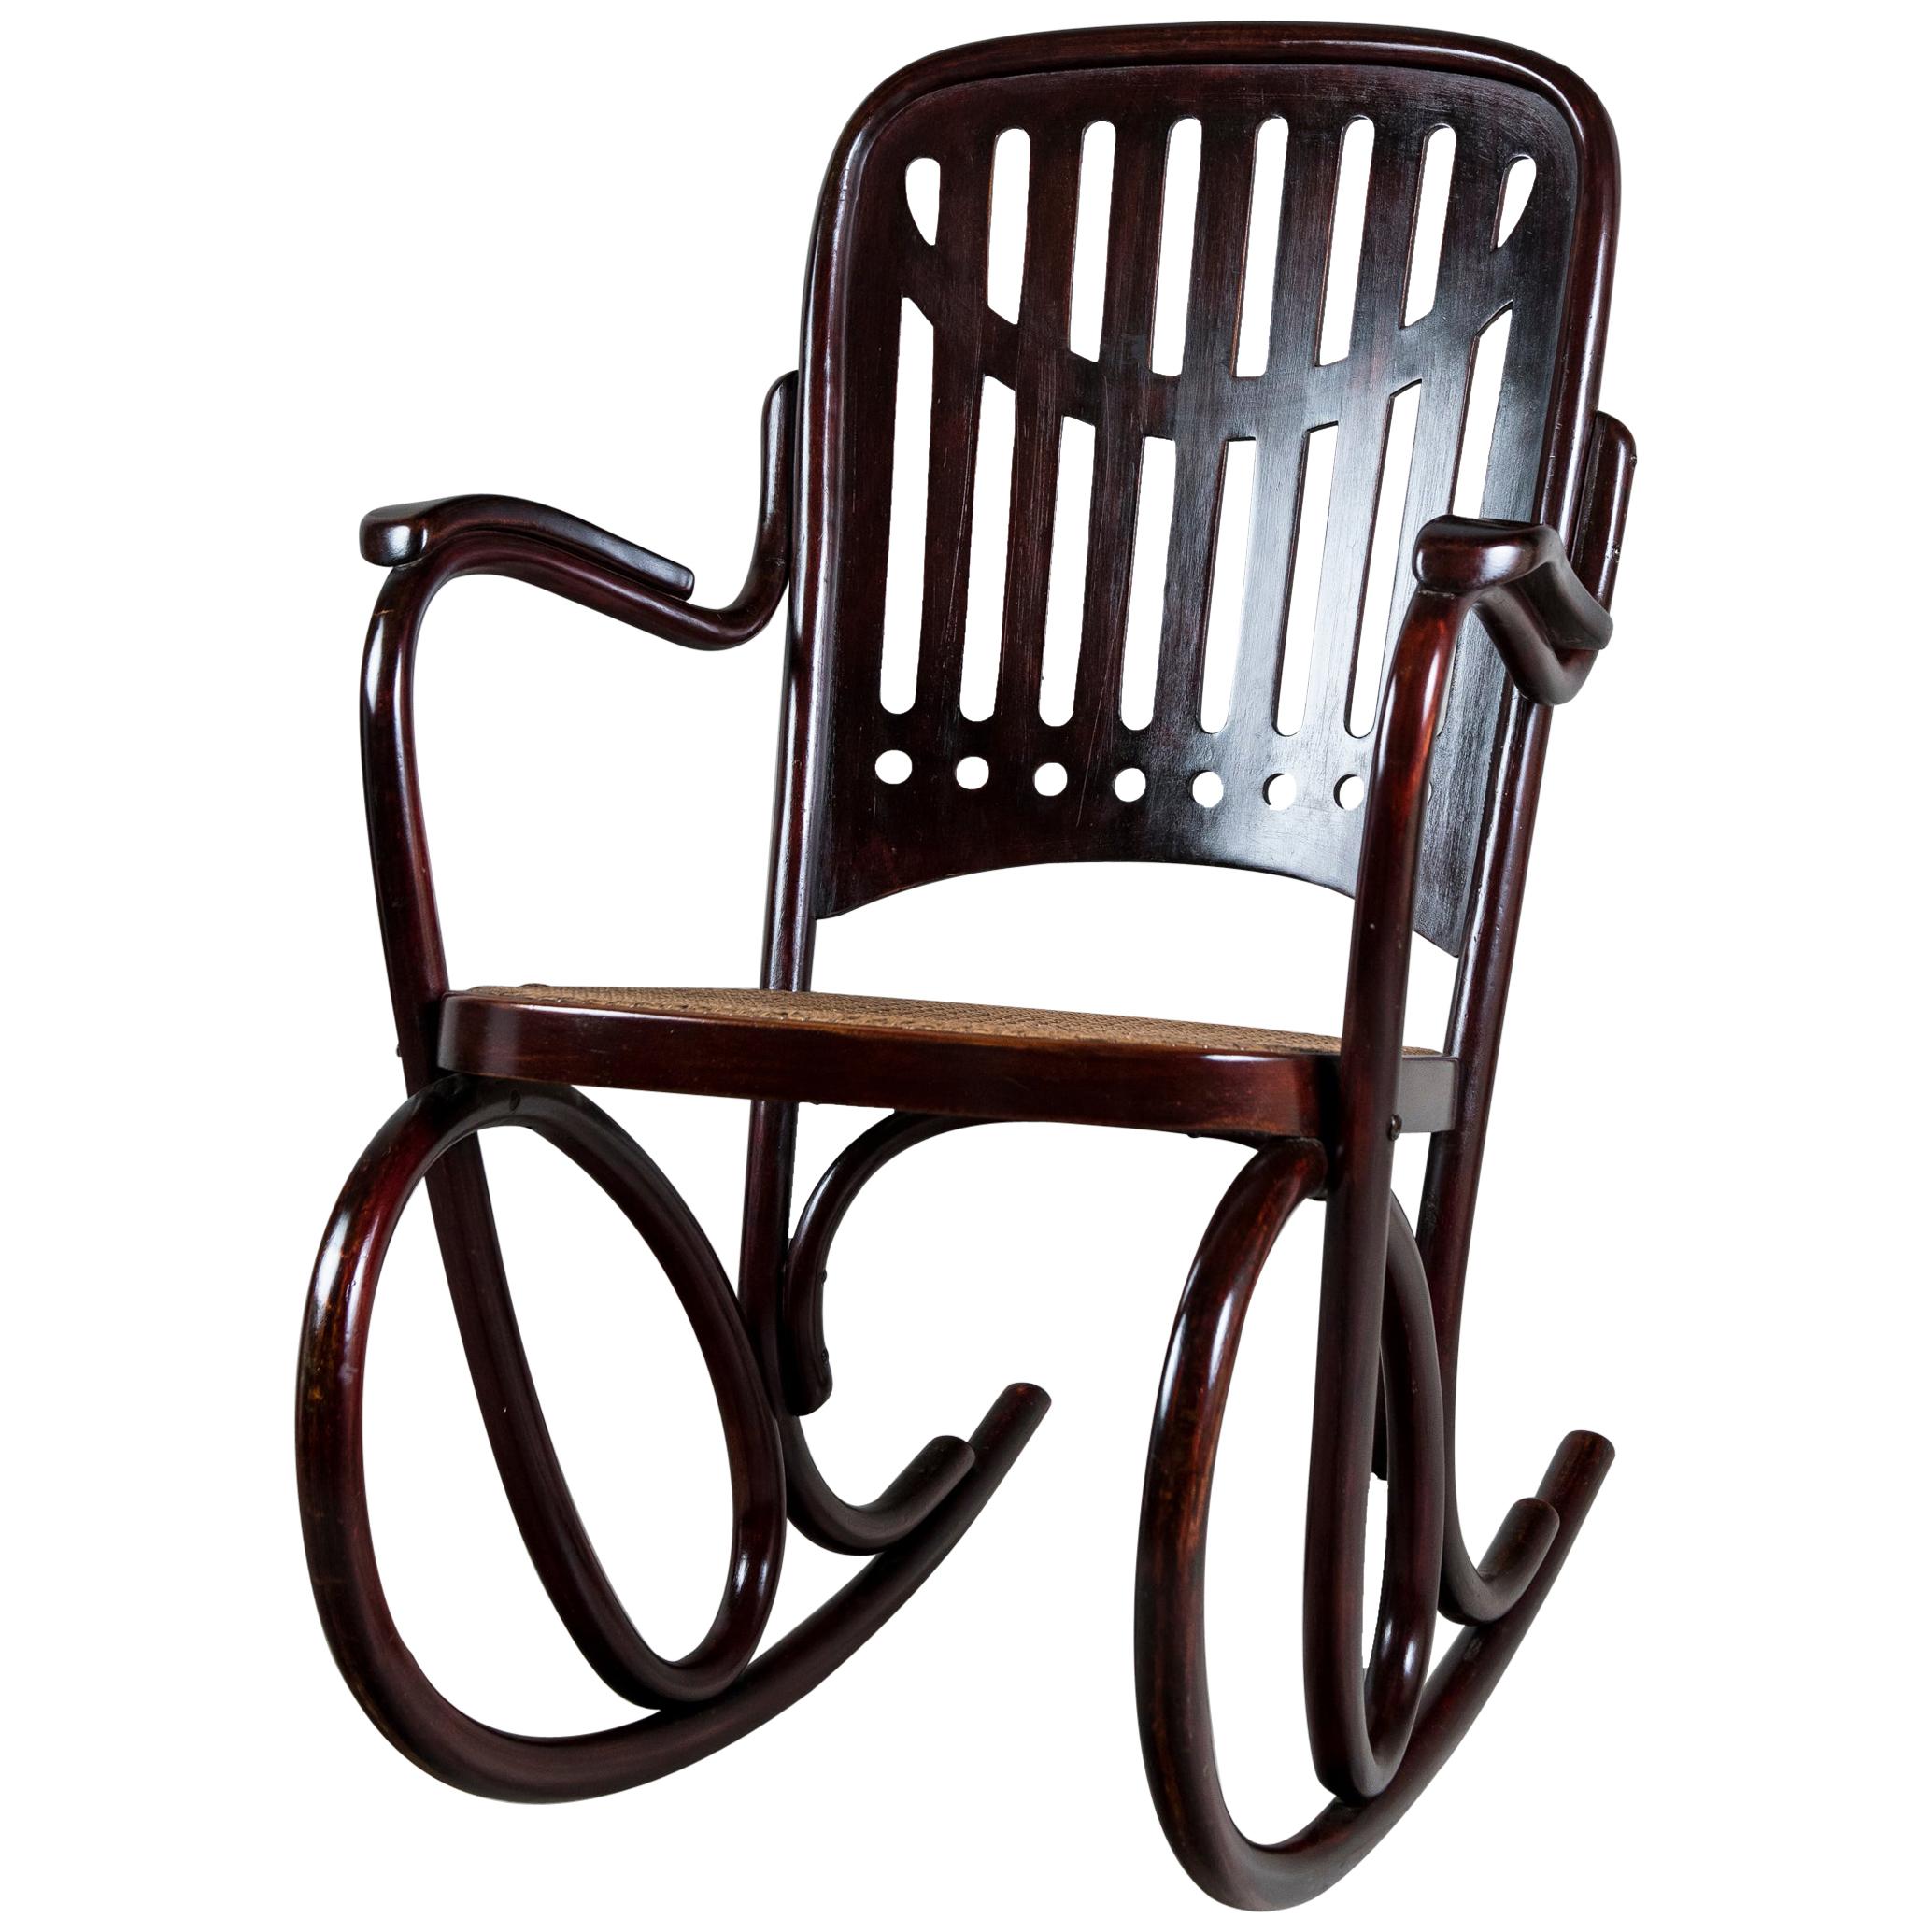 Thonet Rocking Chair, Model Number 71, Vienna, 1910, Signed Thonet Bellow For Sale